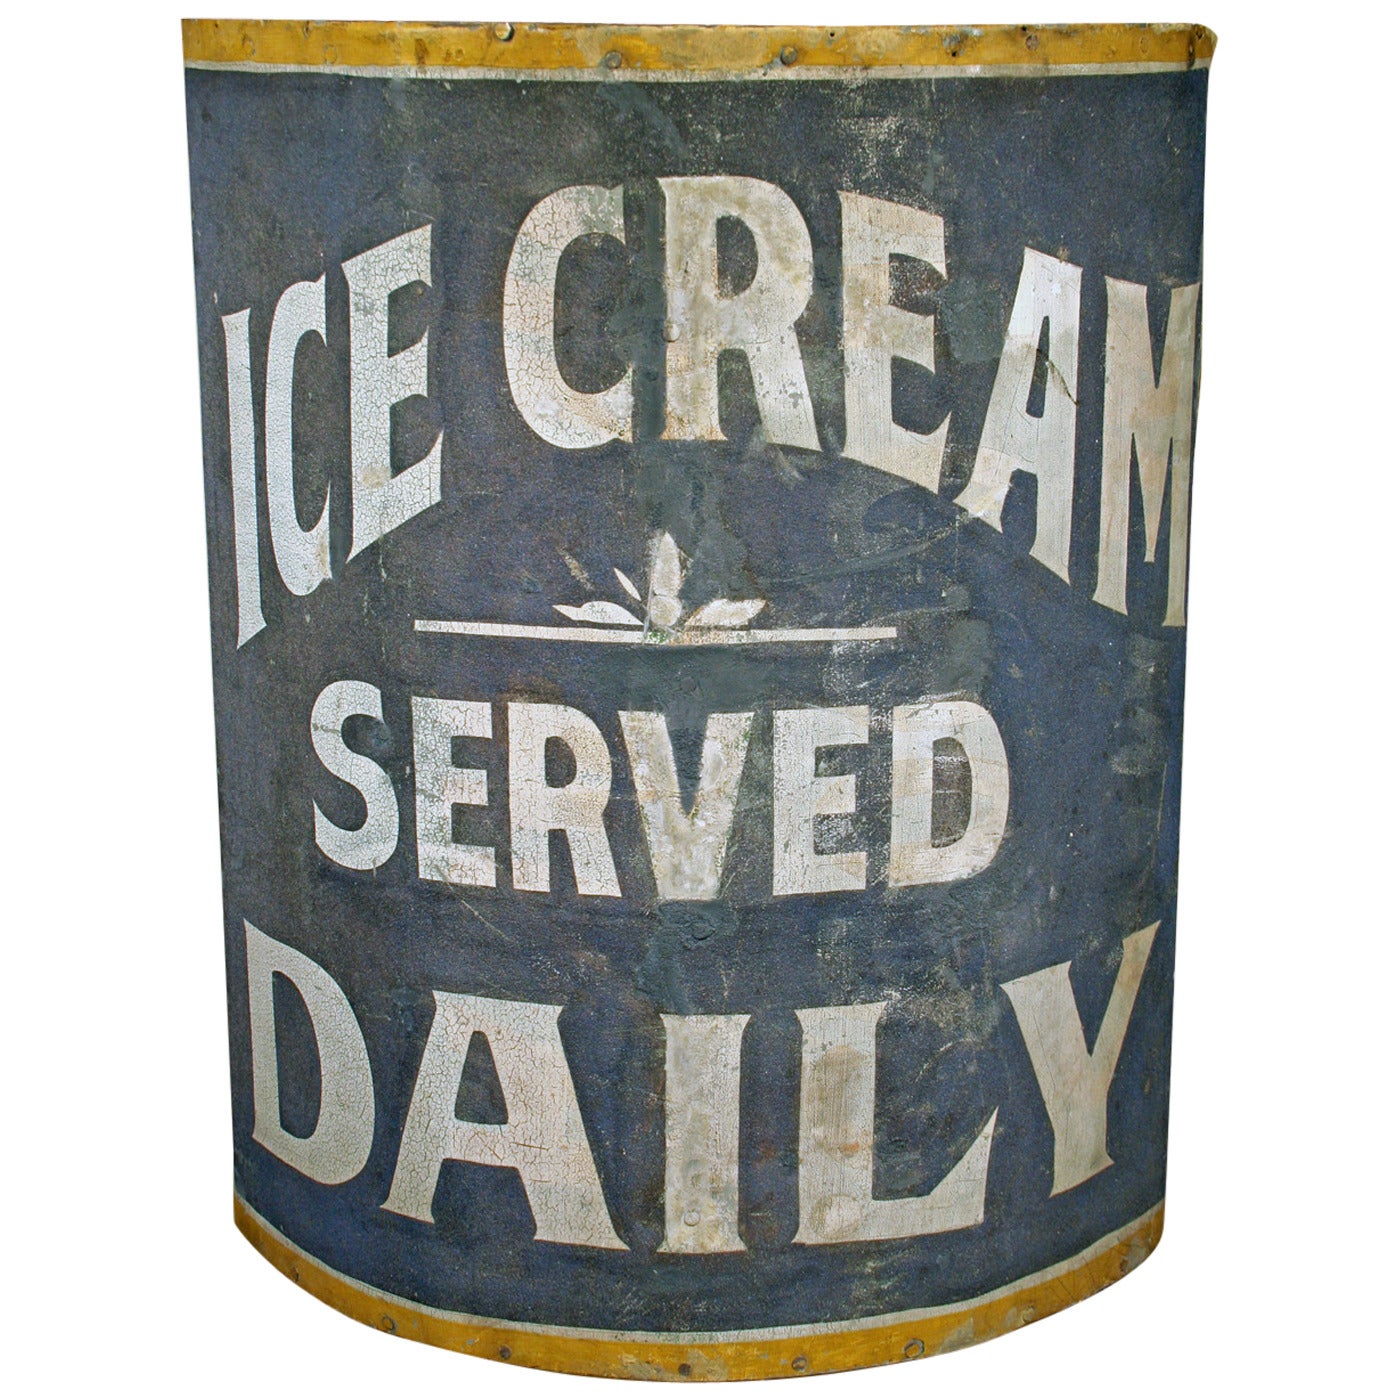 Advertising Trade Sign, "Ice Cream Served Daily"